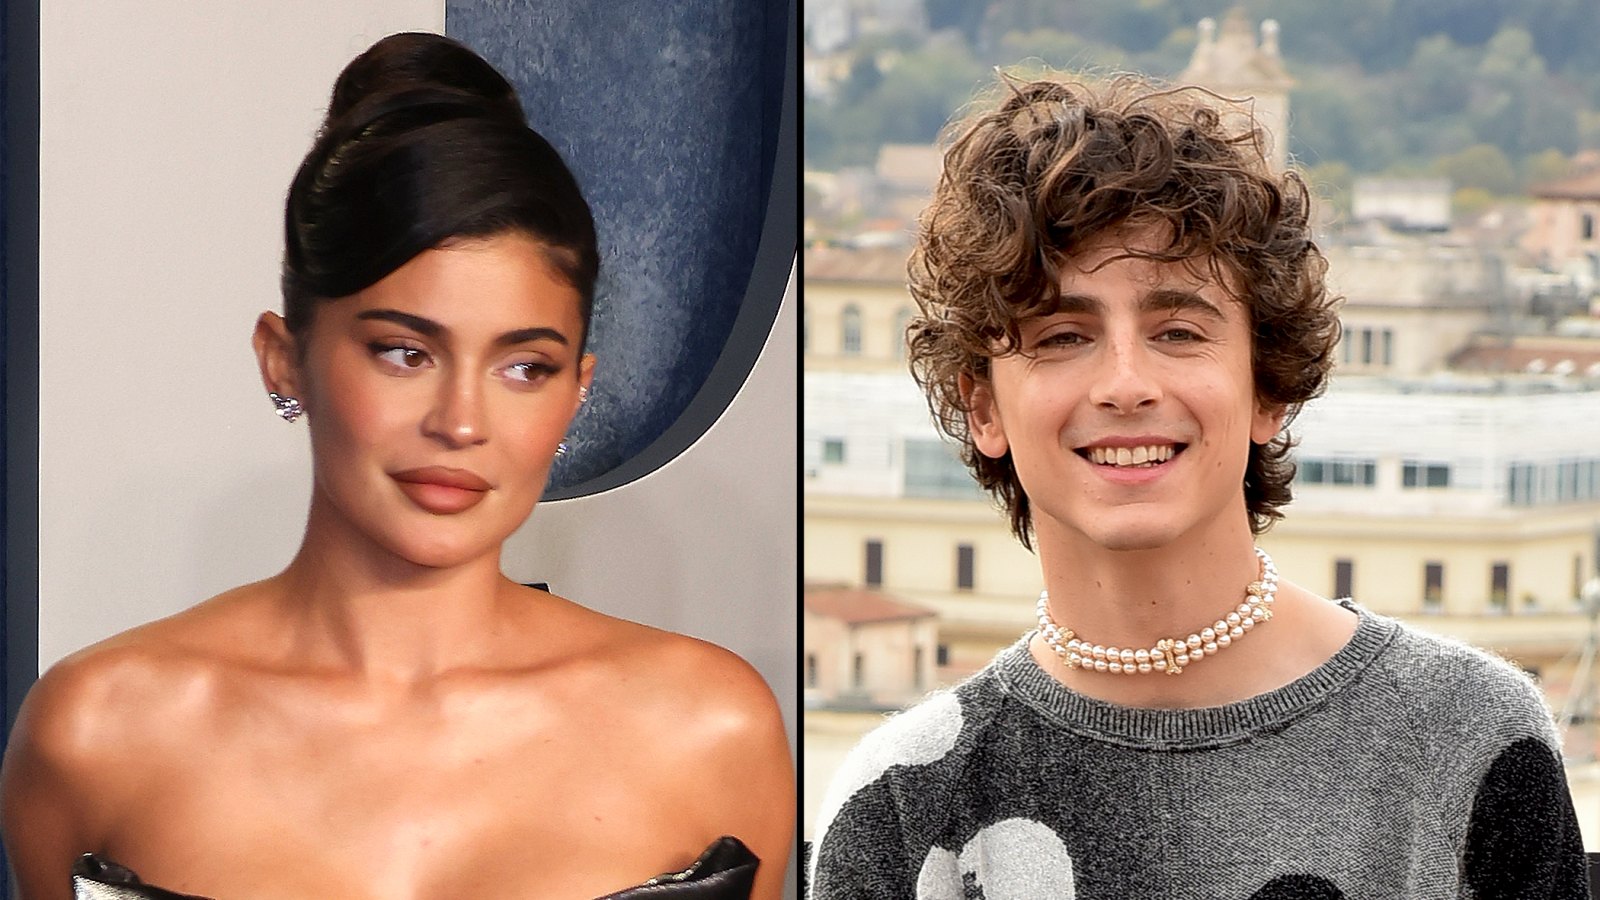 Inside Kylie Jenner and Timothee Chalamet’s ‘New’ Romance: 'Things Aren't That Serious' Yet